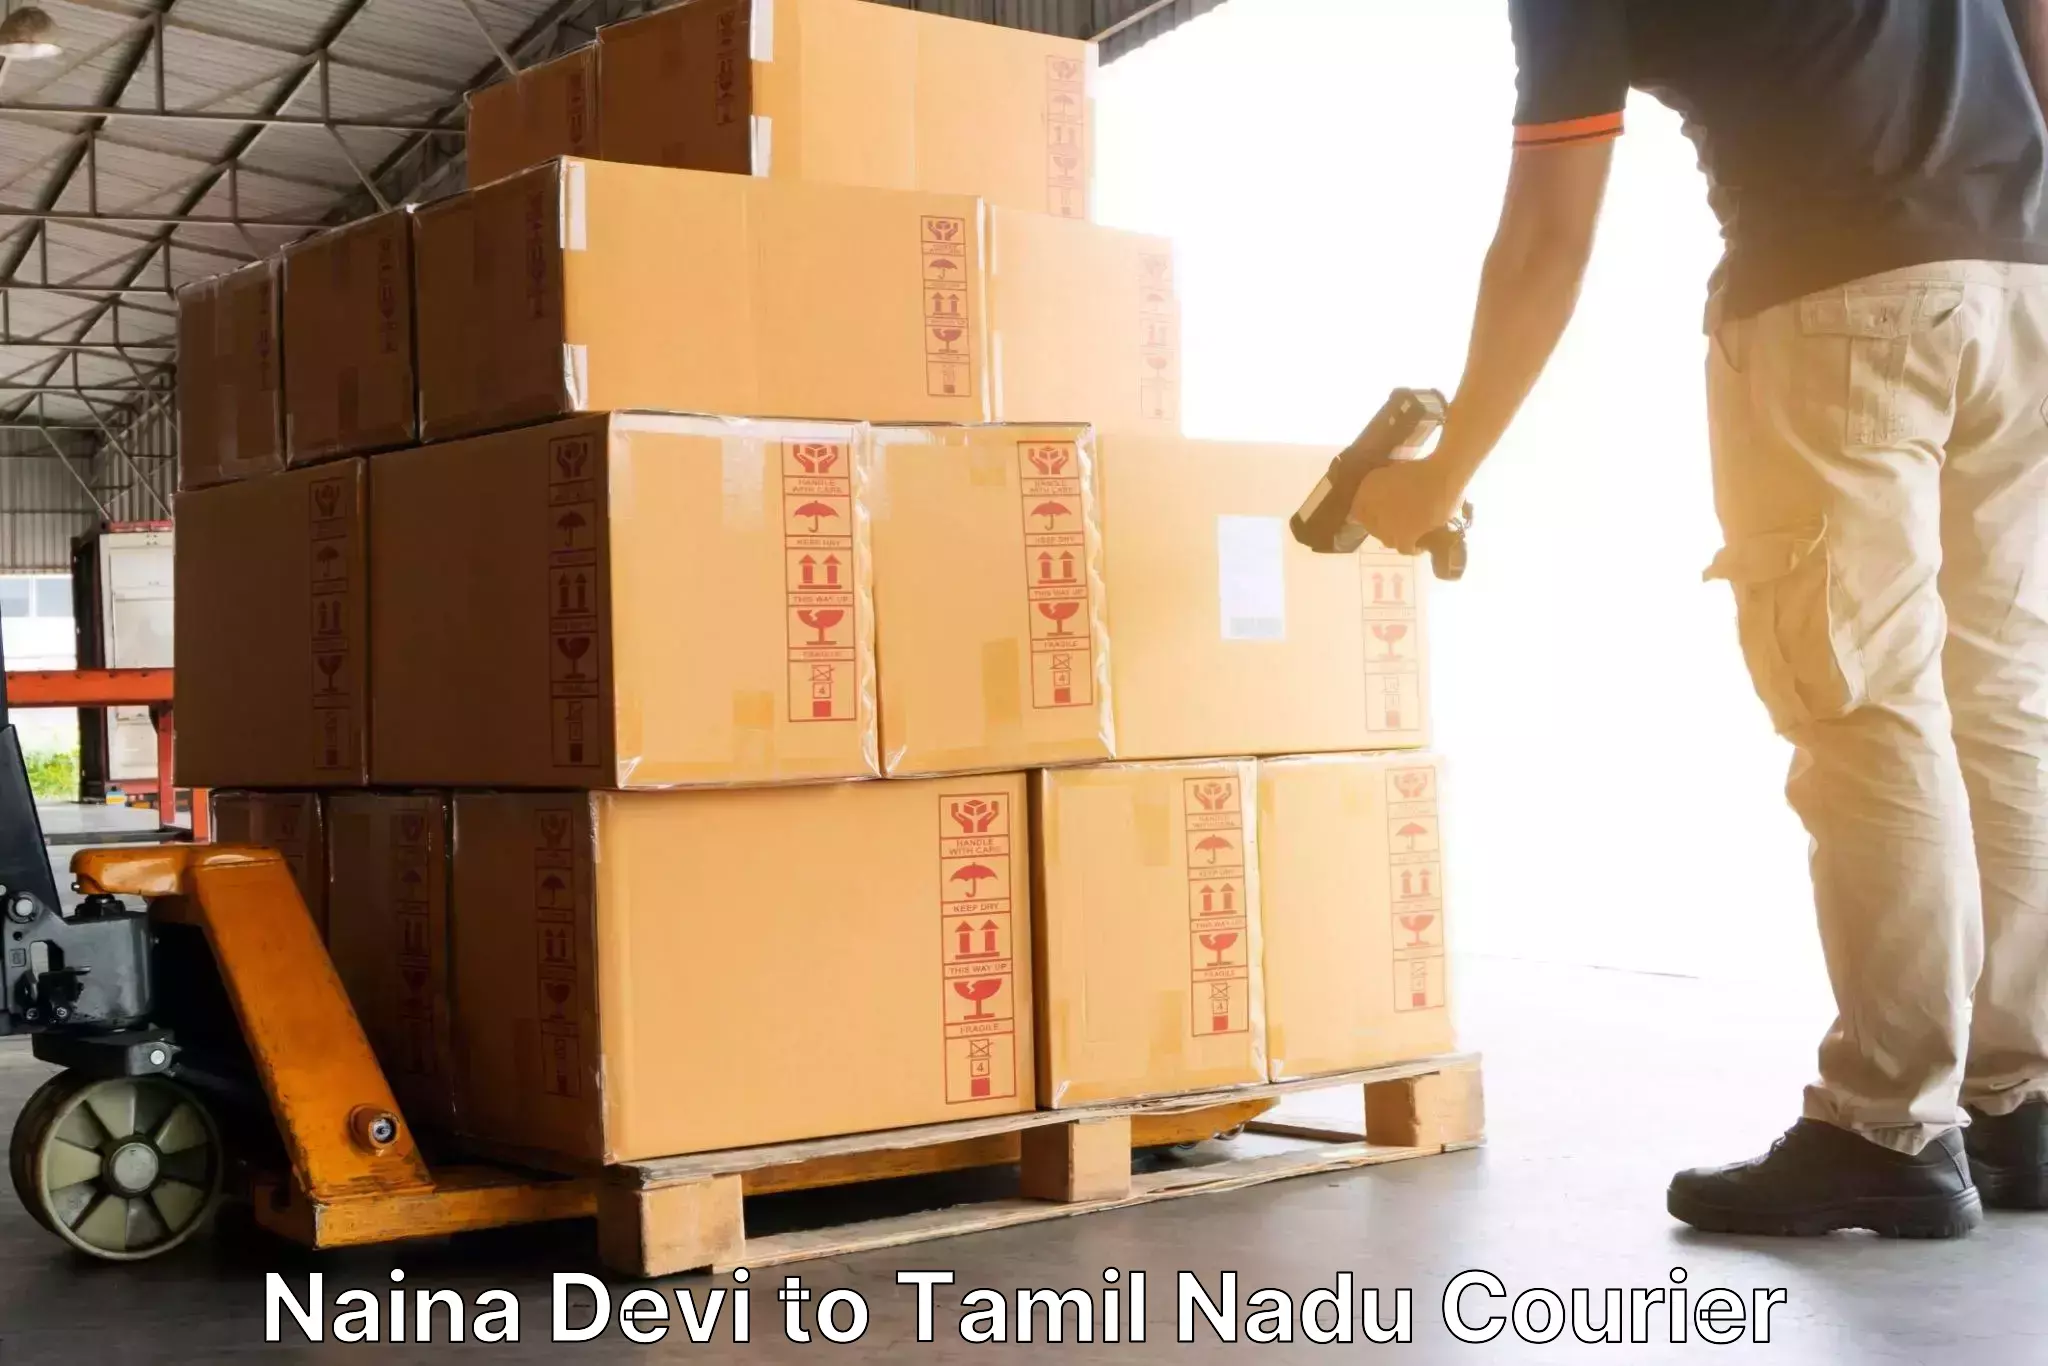 Overnight delivery services Naina Devi to Ennore Port Chennai